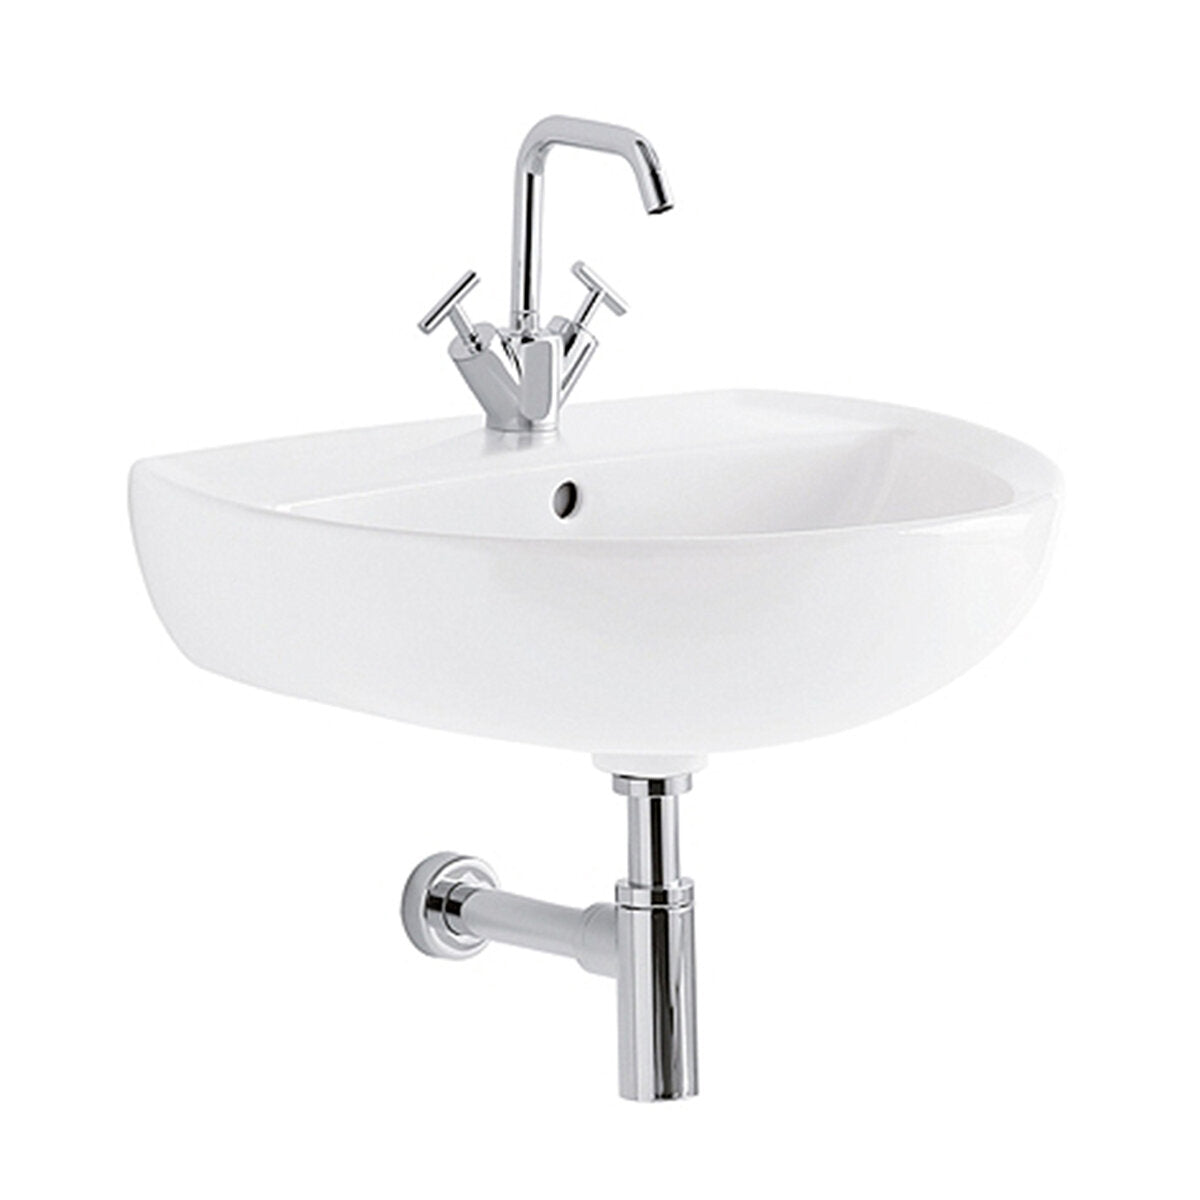 Geberit Colibrì 60 cm single hole wall-hung washbasin in glossy white